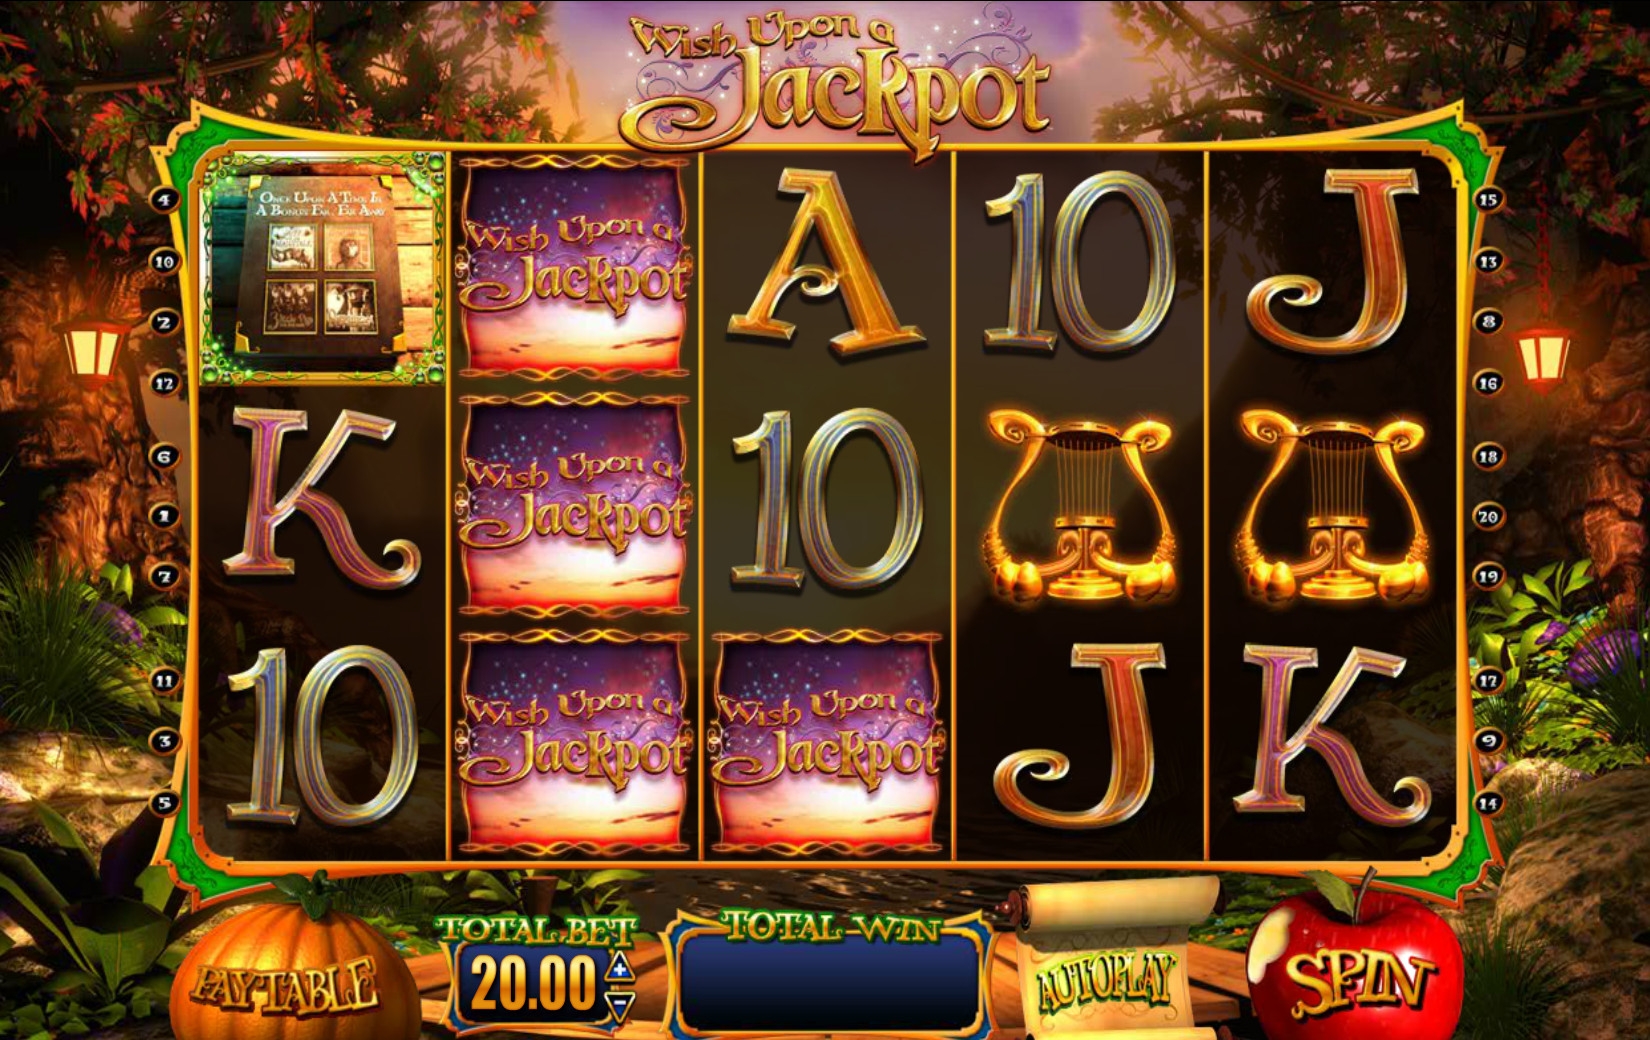 Wish Upon a Jackpot (Wish Upon a Jackpot) from category Slots